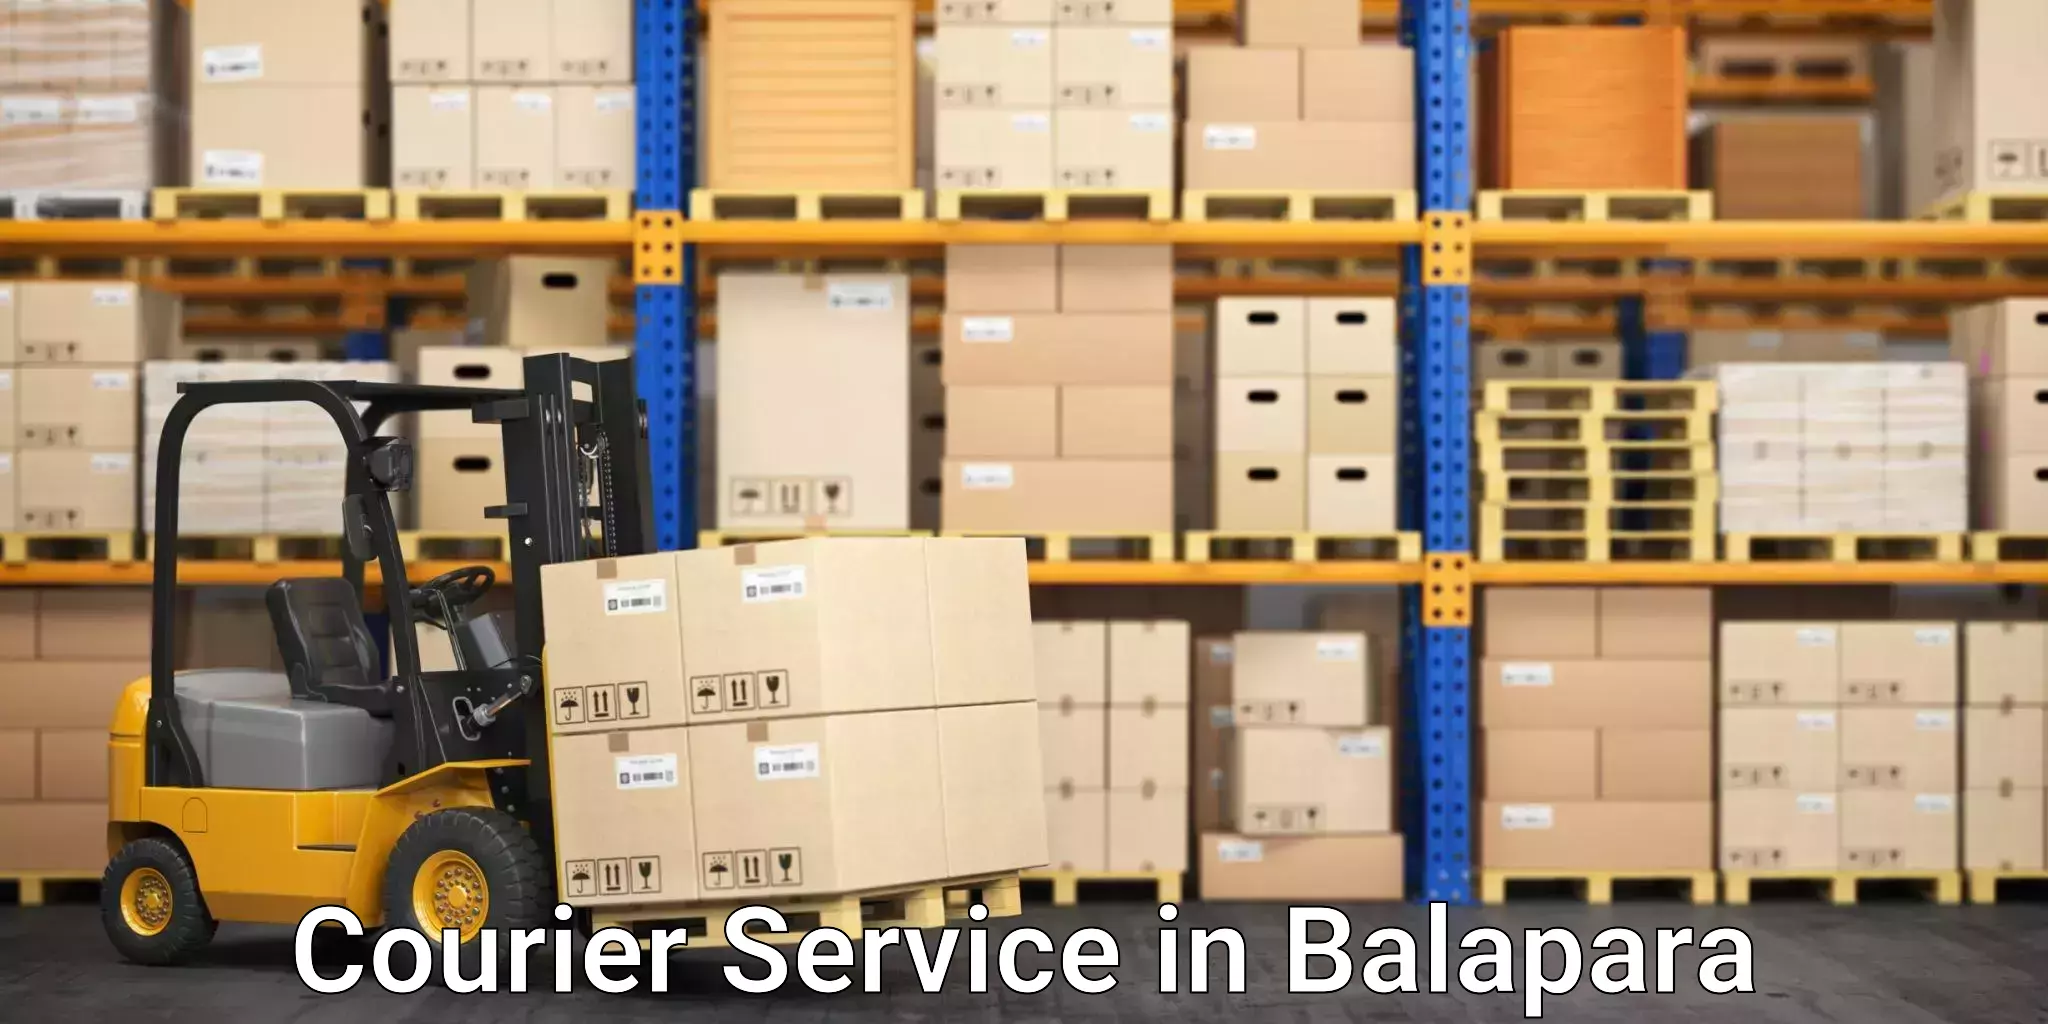 Tailored freight services in Balapara